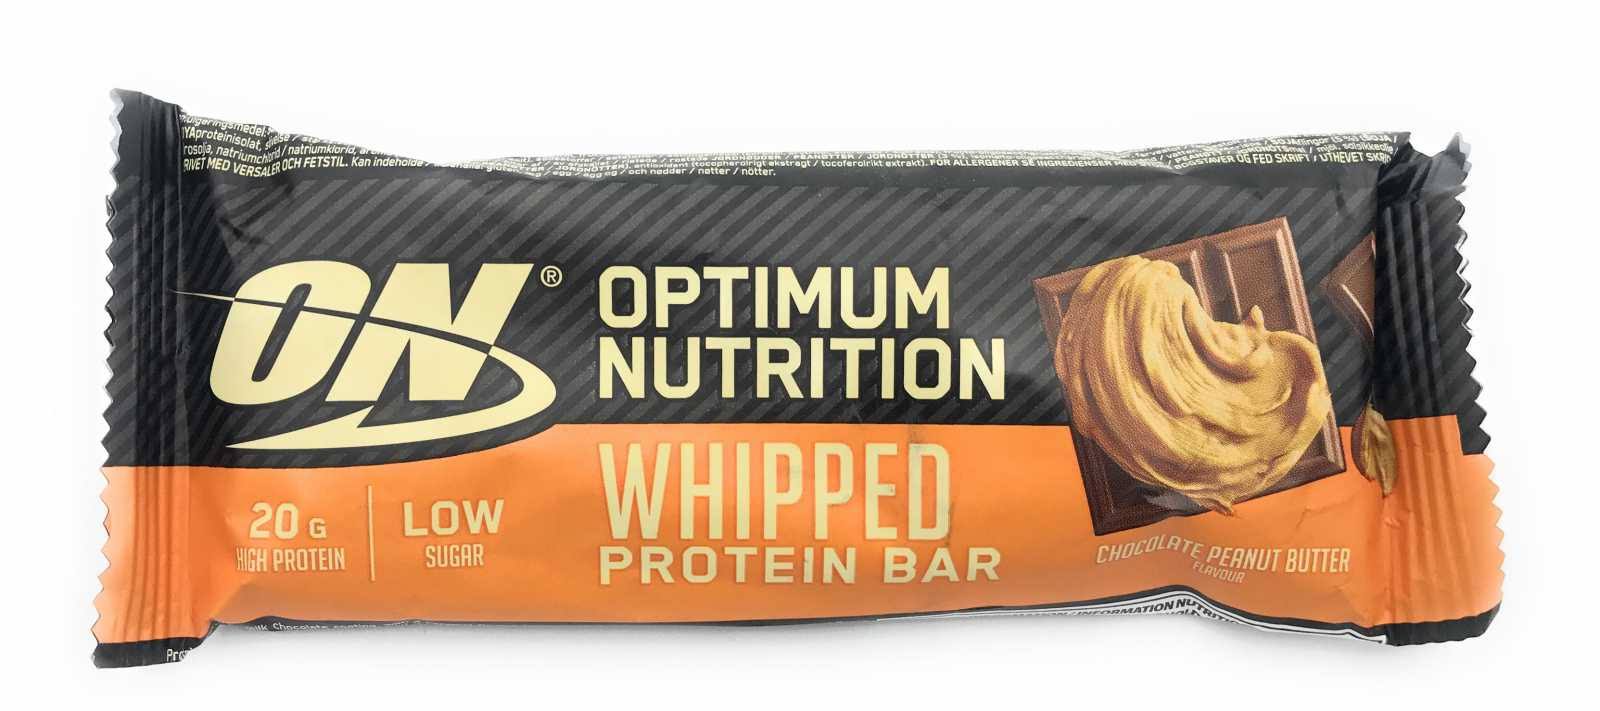 Optimum Nutrition Whipped Protein Bar 10x60g Chocolate Peanut Butter